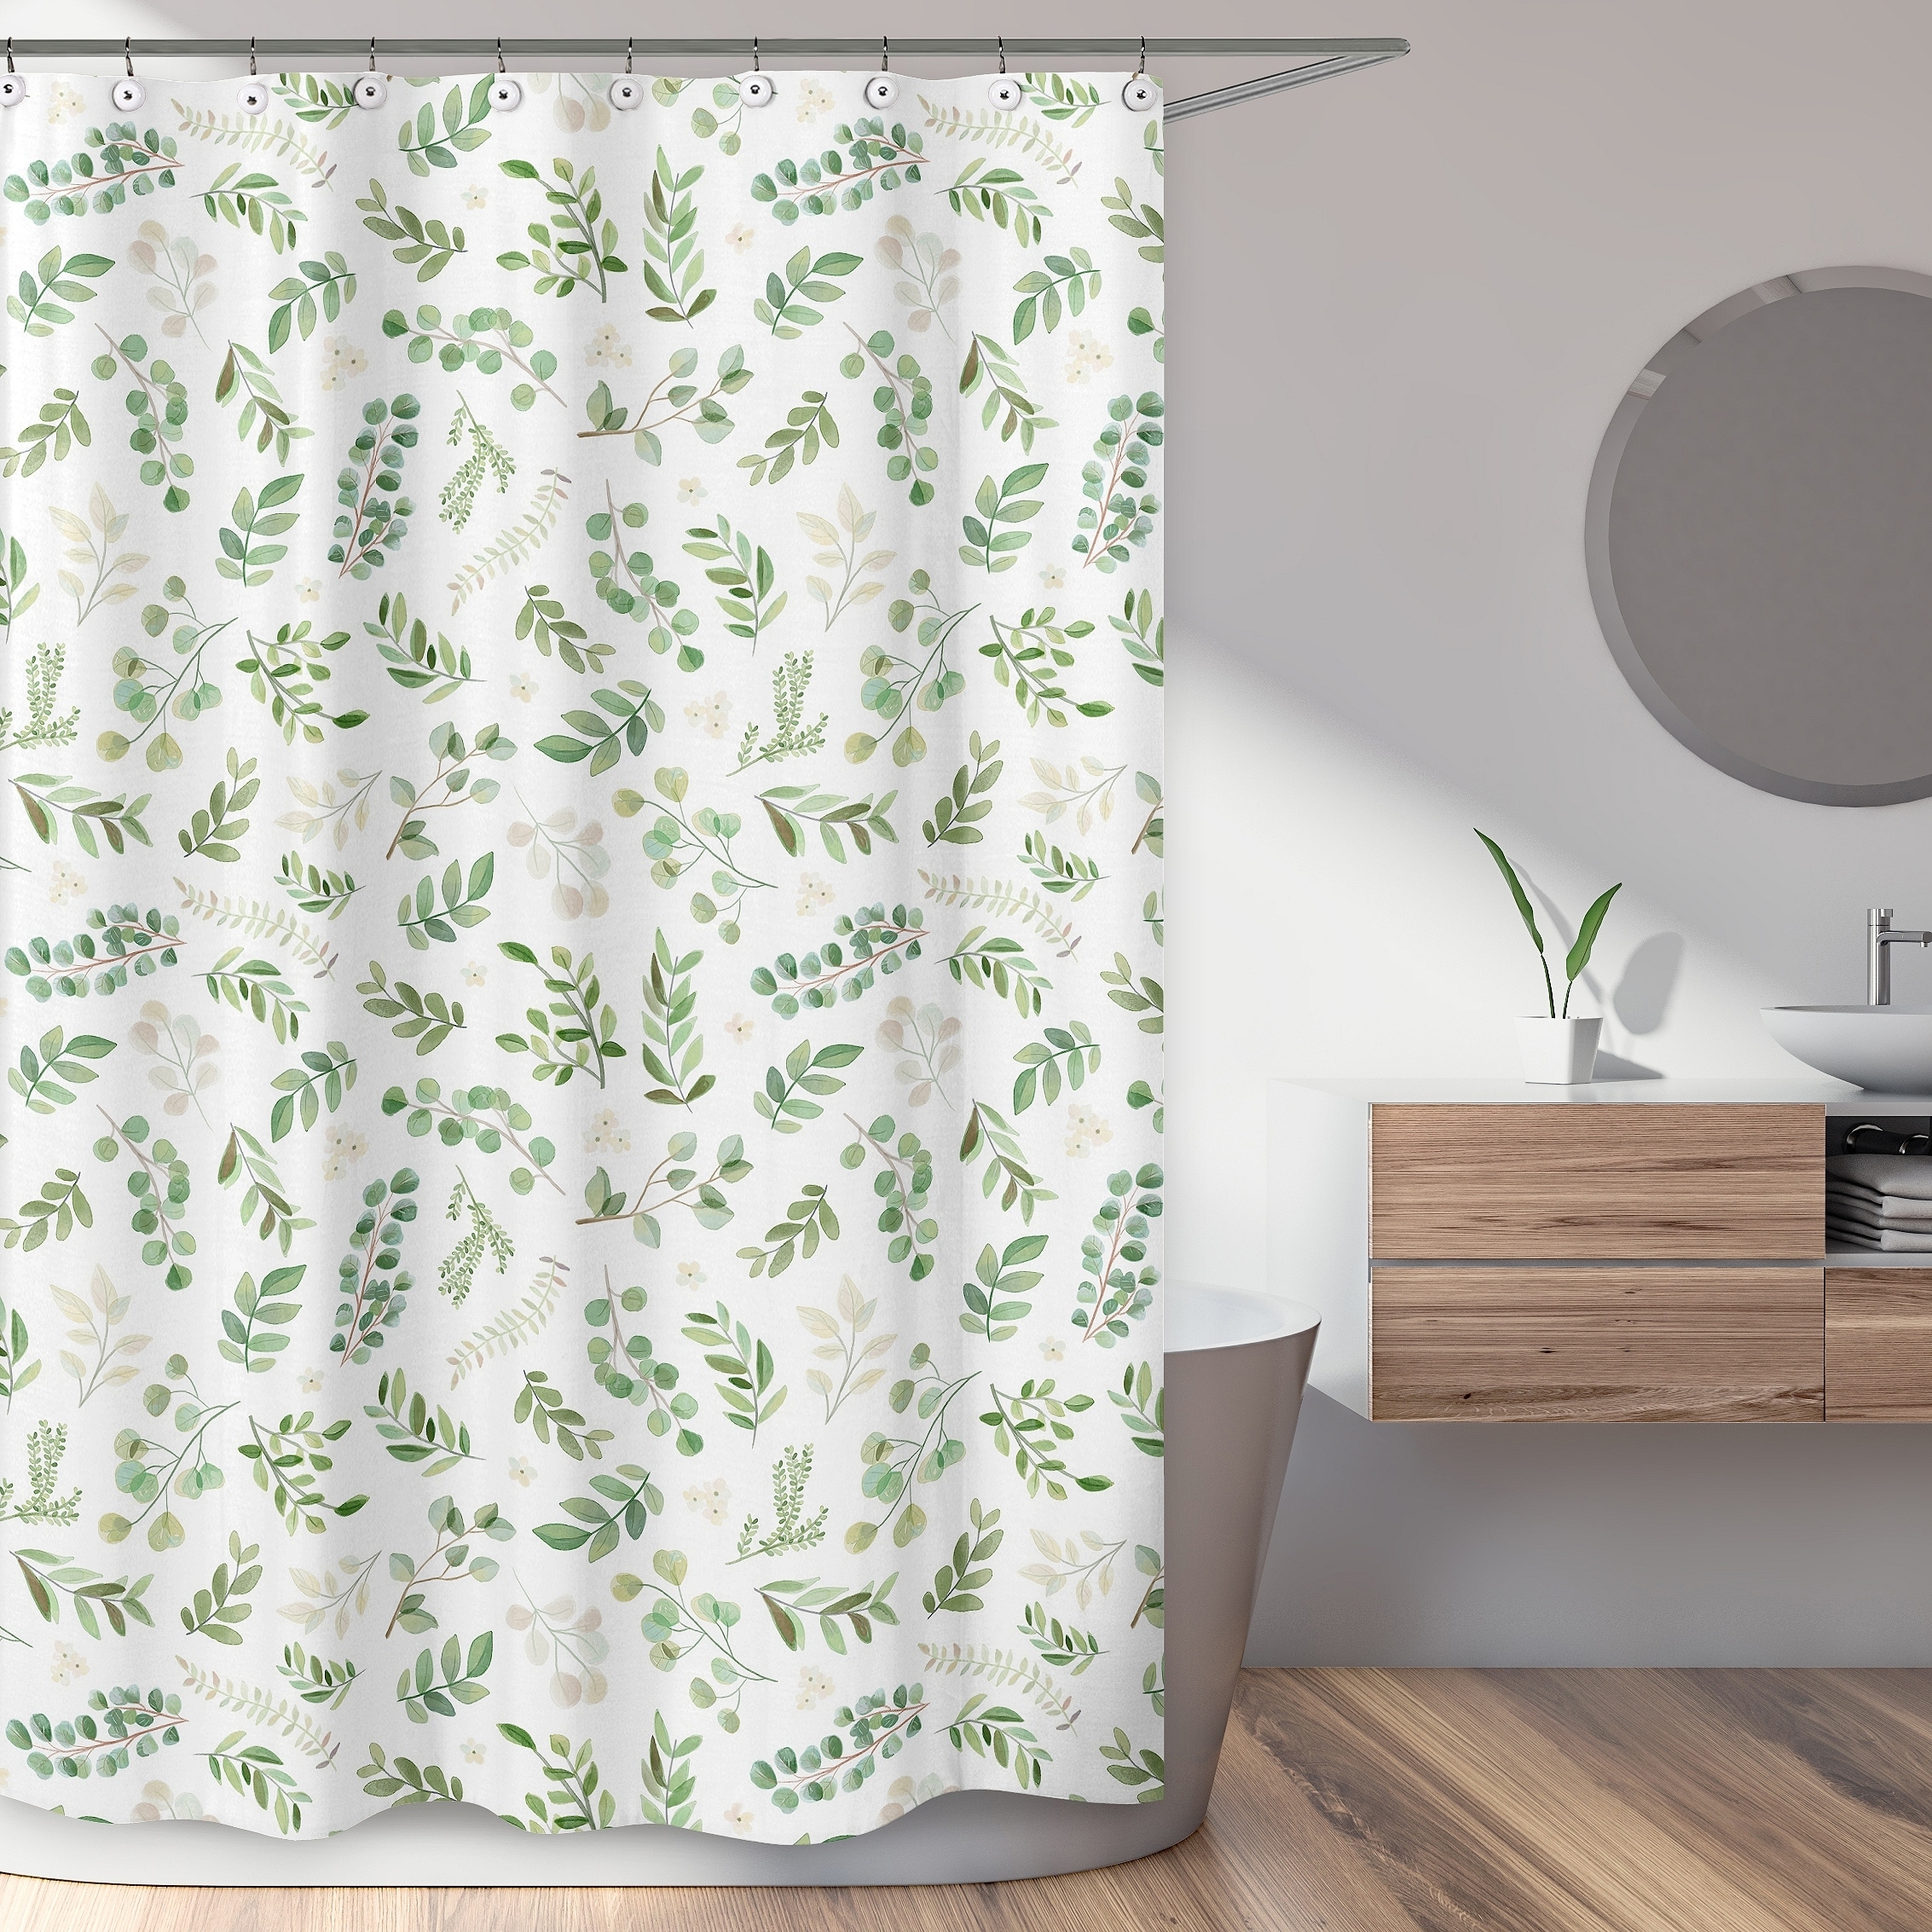 Shower Curtain Tropical Plant Leaves Printed Polyester Hooks Bath Curtain S-XL 